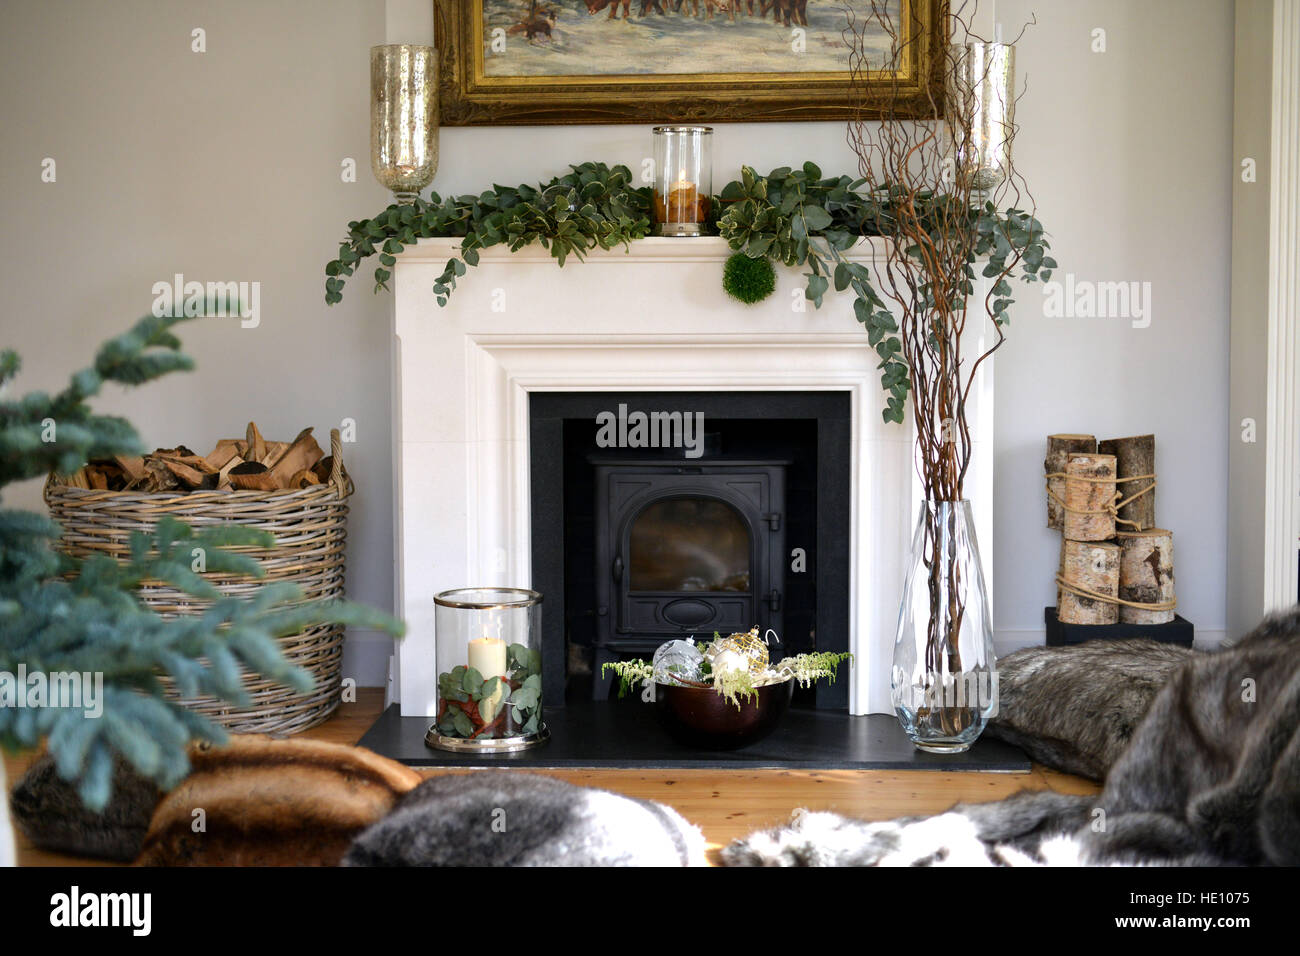 Fireplace decorated for Christmas Stock Photo